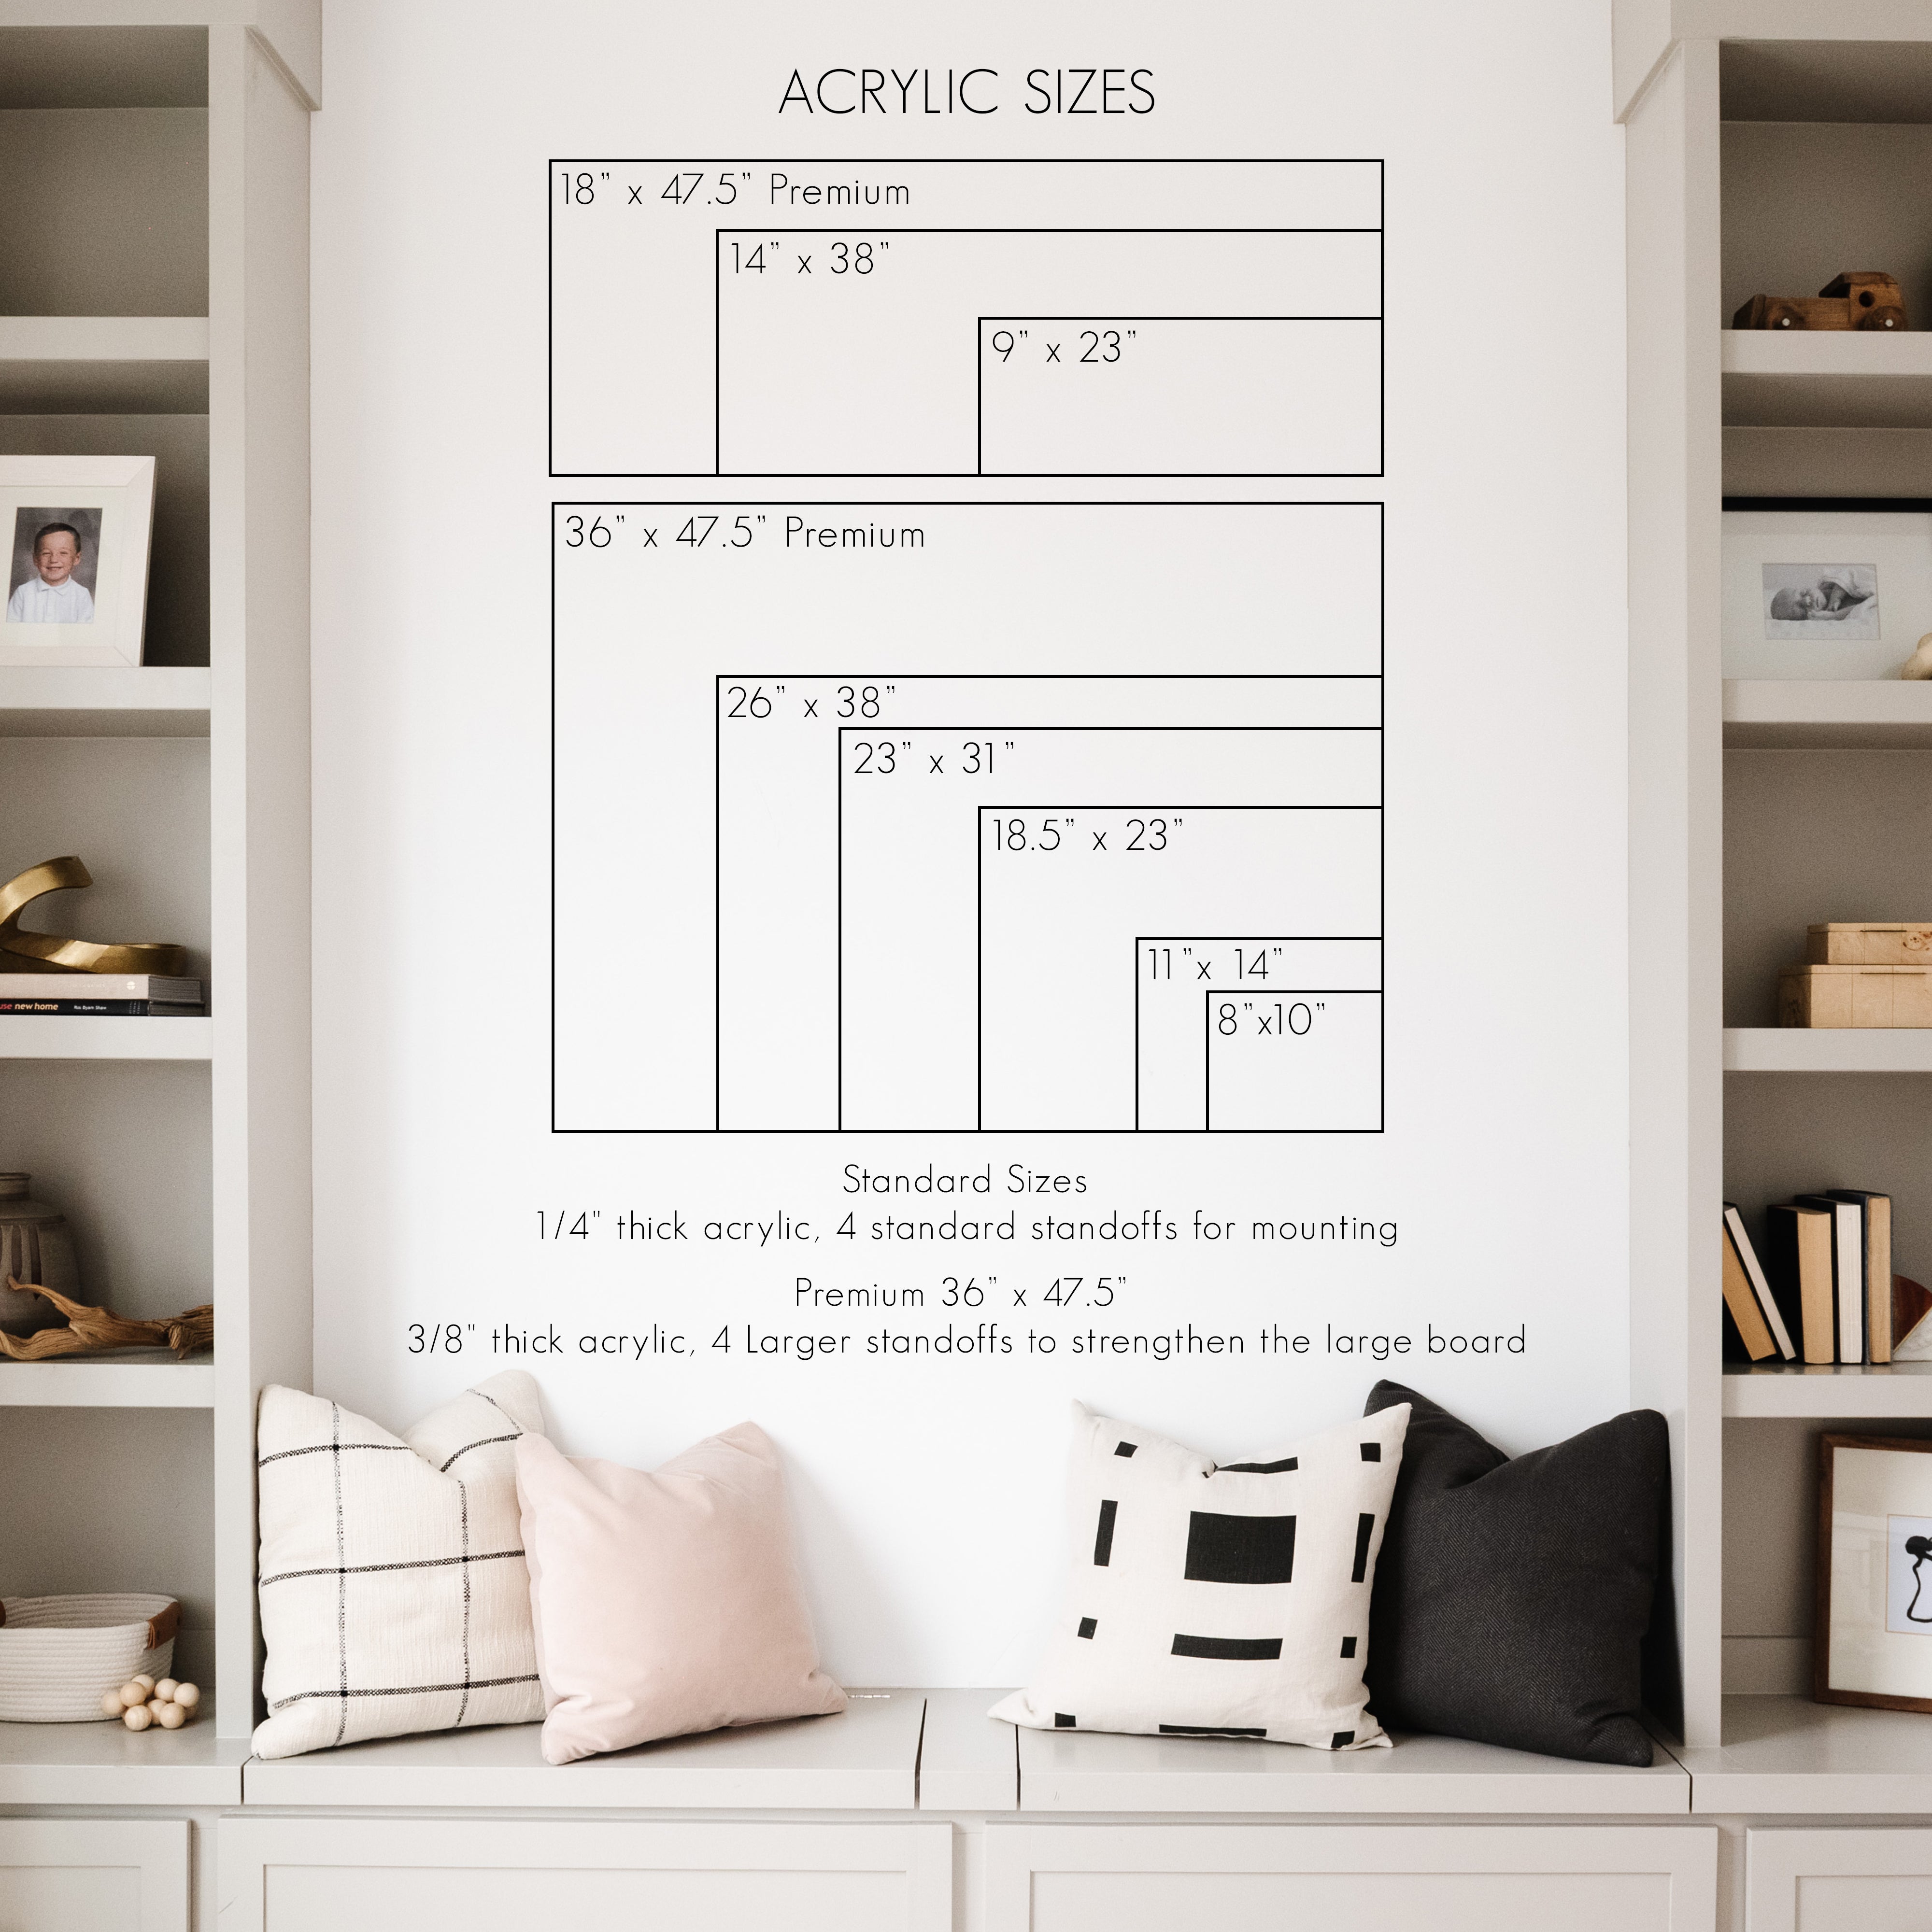 Week & Month Frosted Acrylic Calendar + 6 Sections | Horizontal Craig